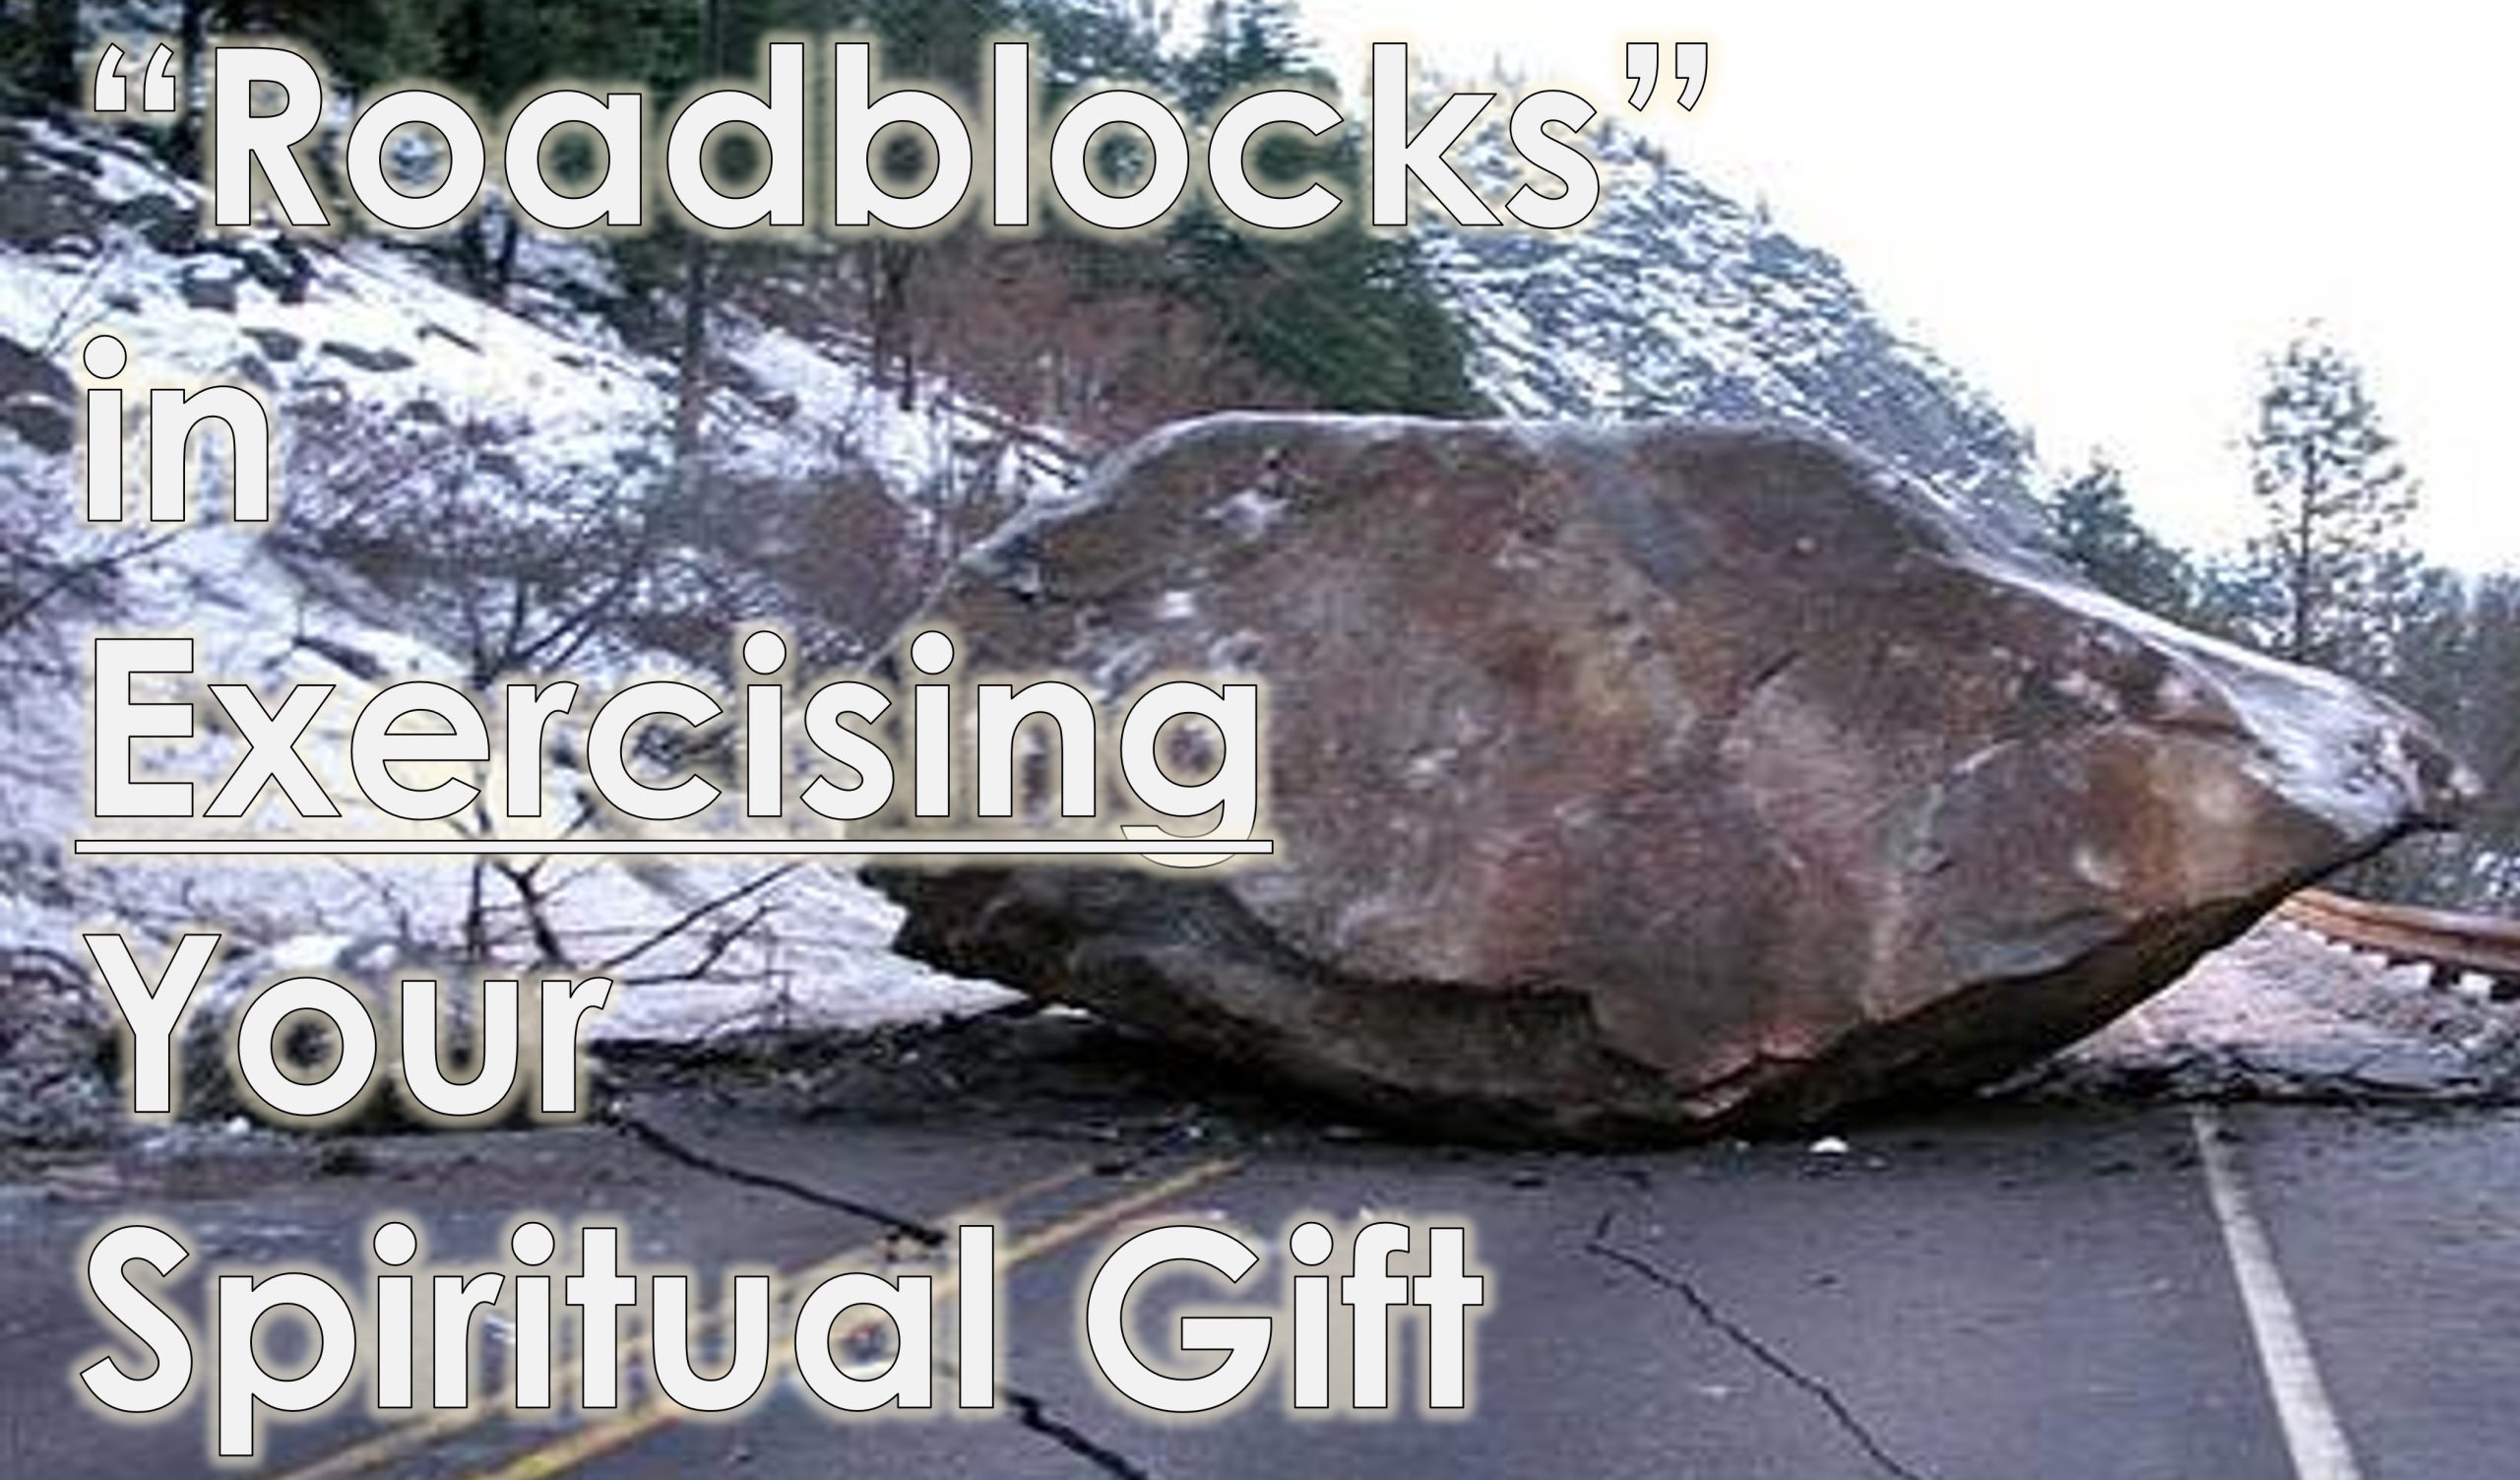 You are currently viewing “Roadblocks” in Exercising Your Spiritual Gift – February 11th